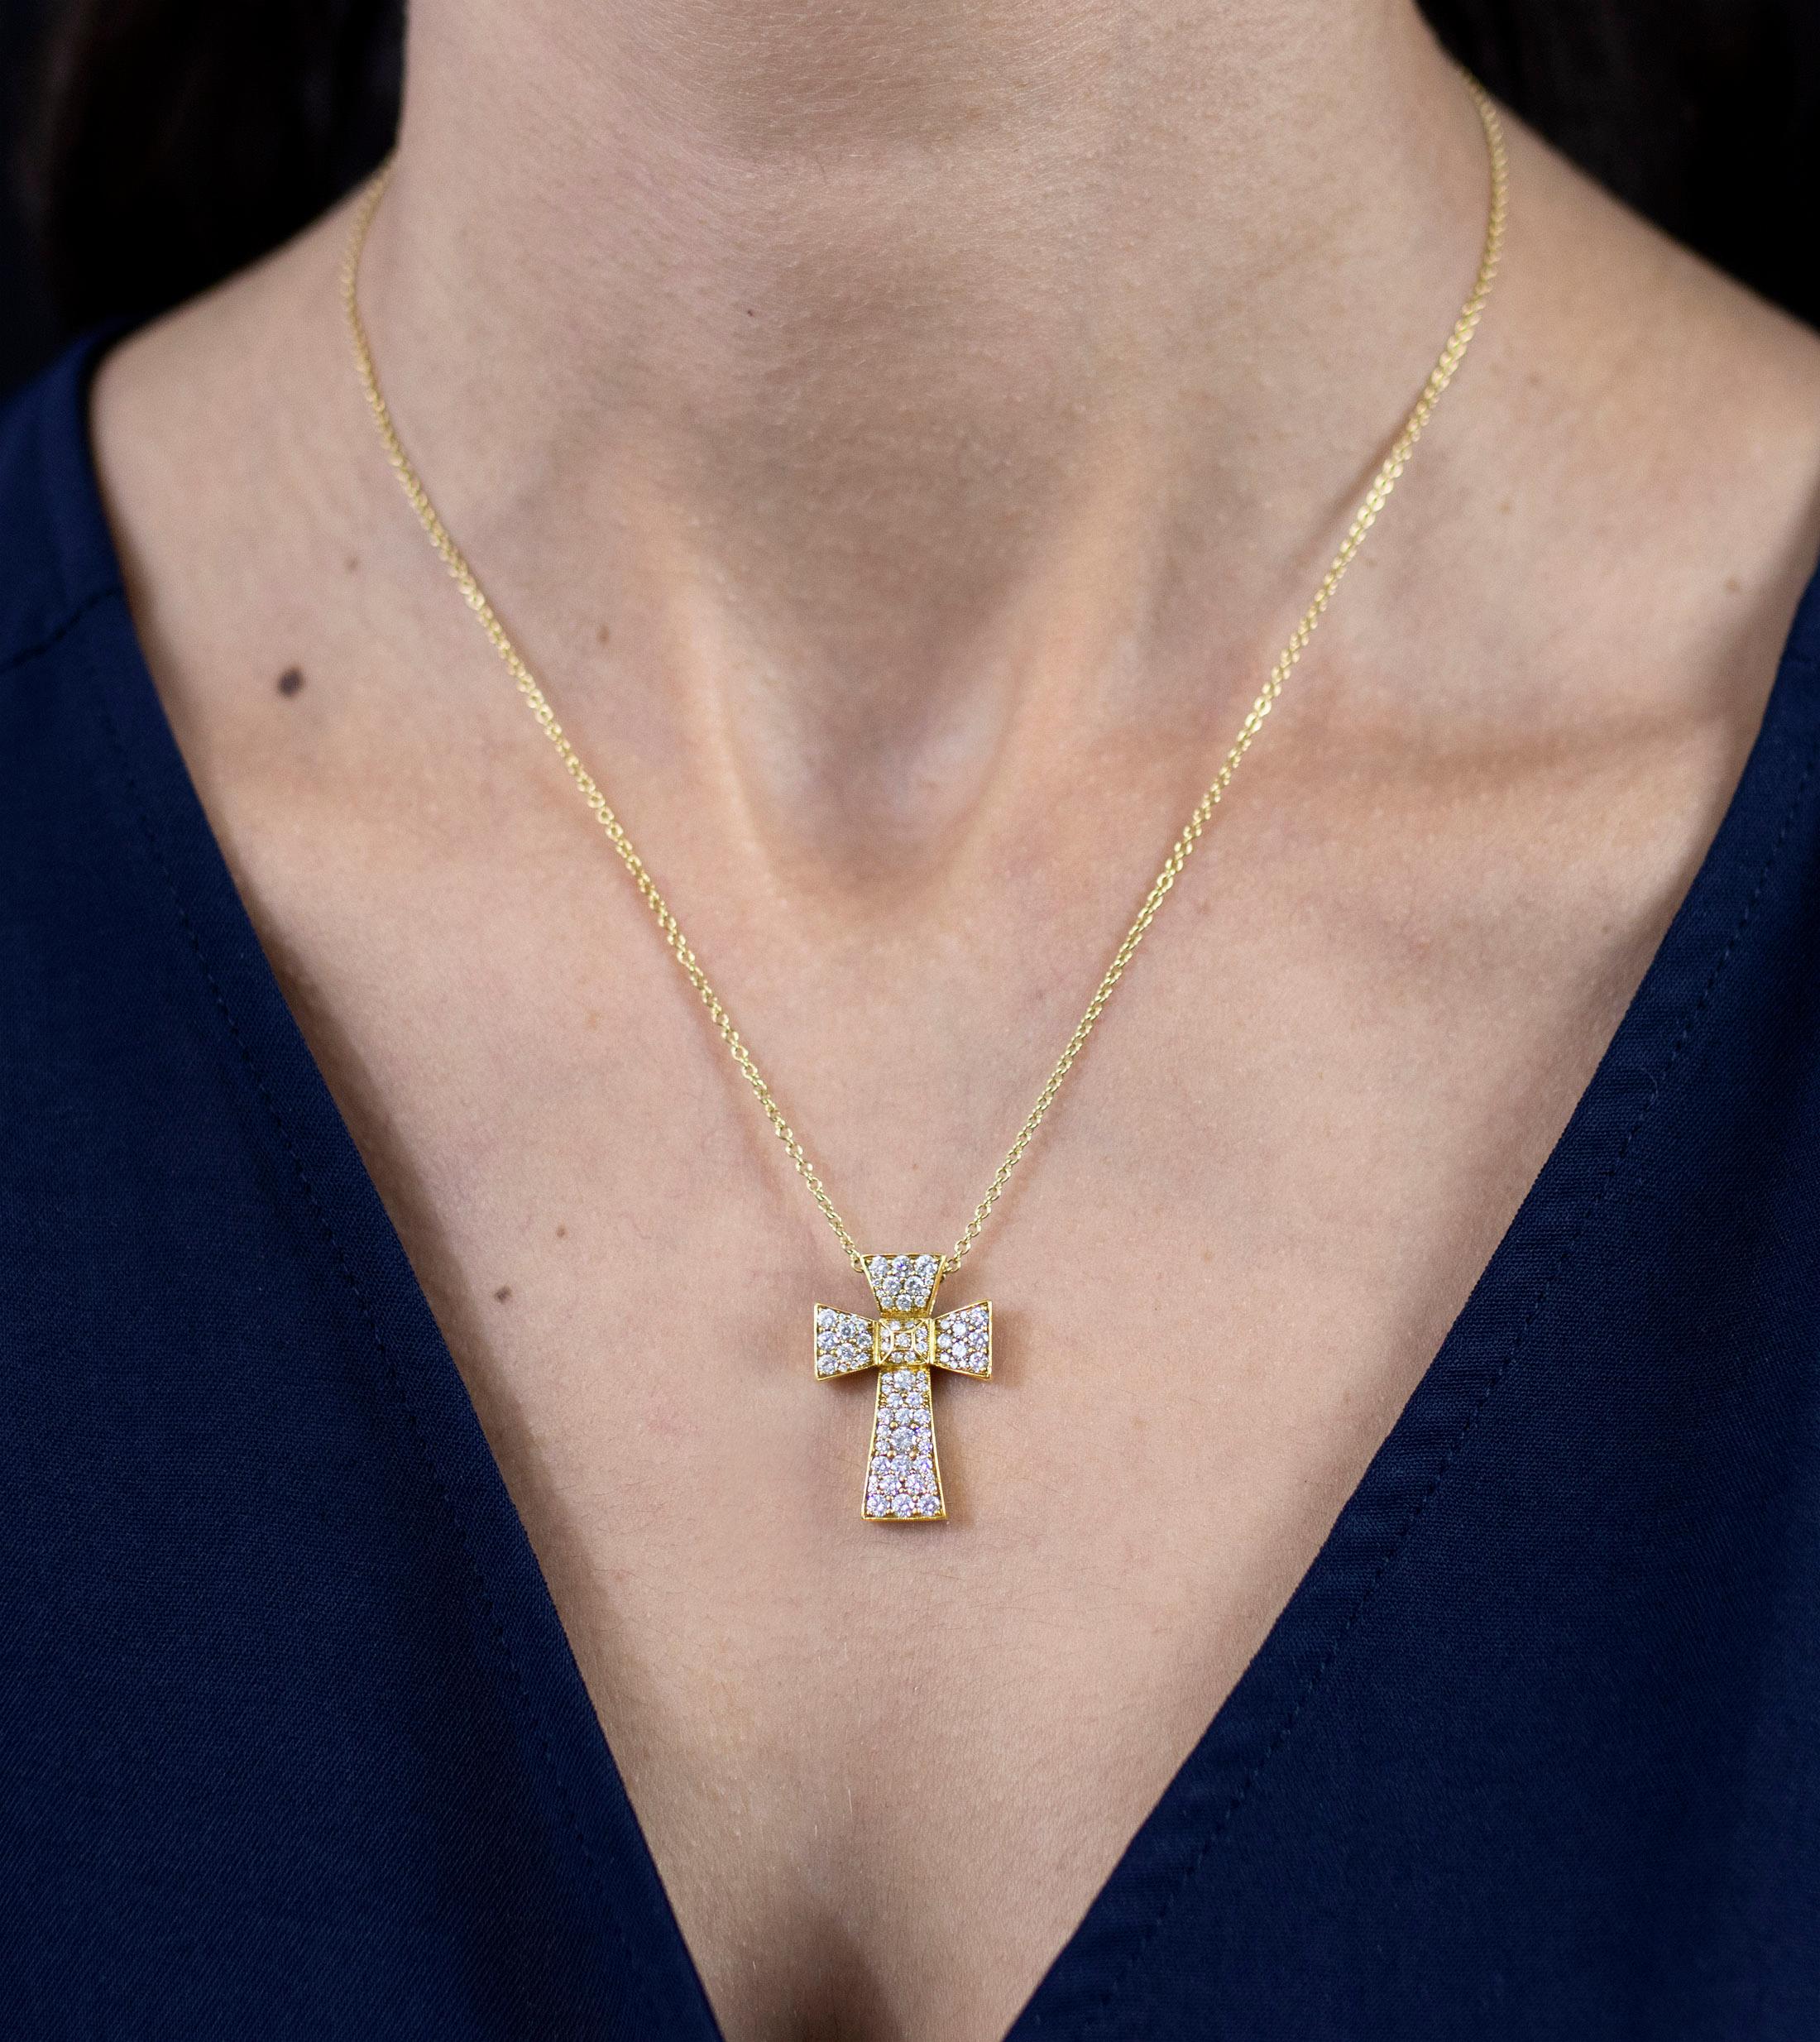 A unique cross pendant design accented with round brilliant diamonds weighing 1.70 carats total. Made with 18K Yellow Gold and 16 inches in Length.

Roman Malakov is a custom house, specializing in creating anything you can imagine. If you would